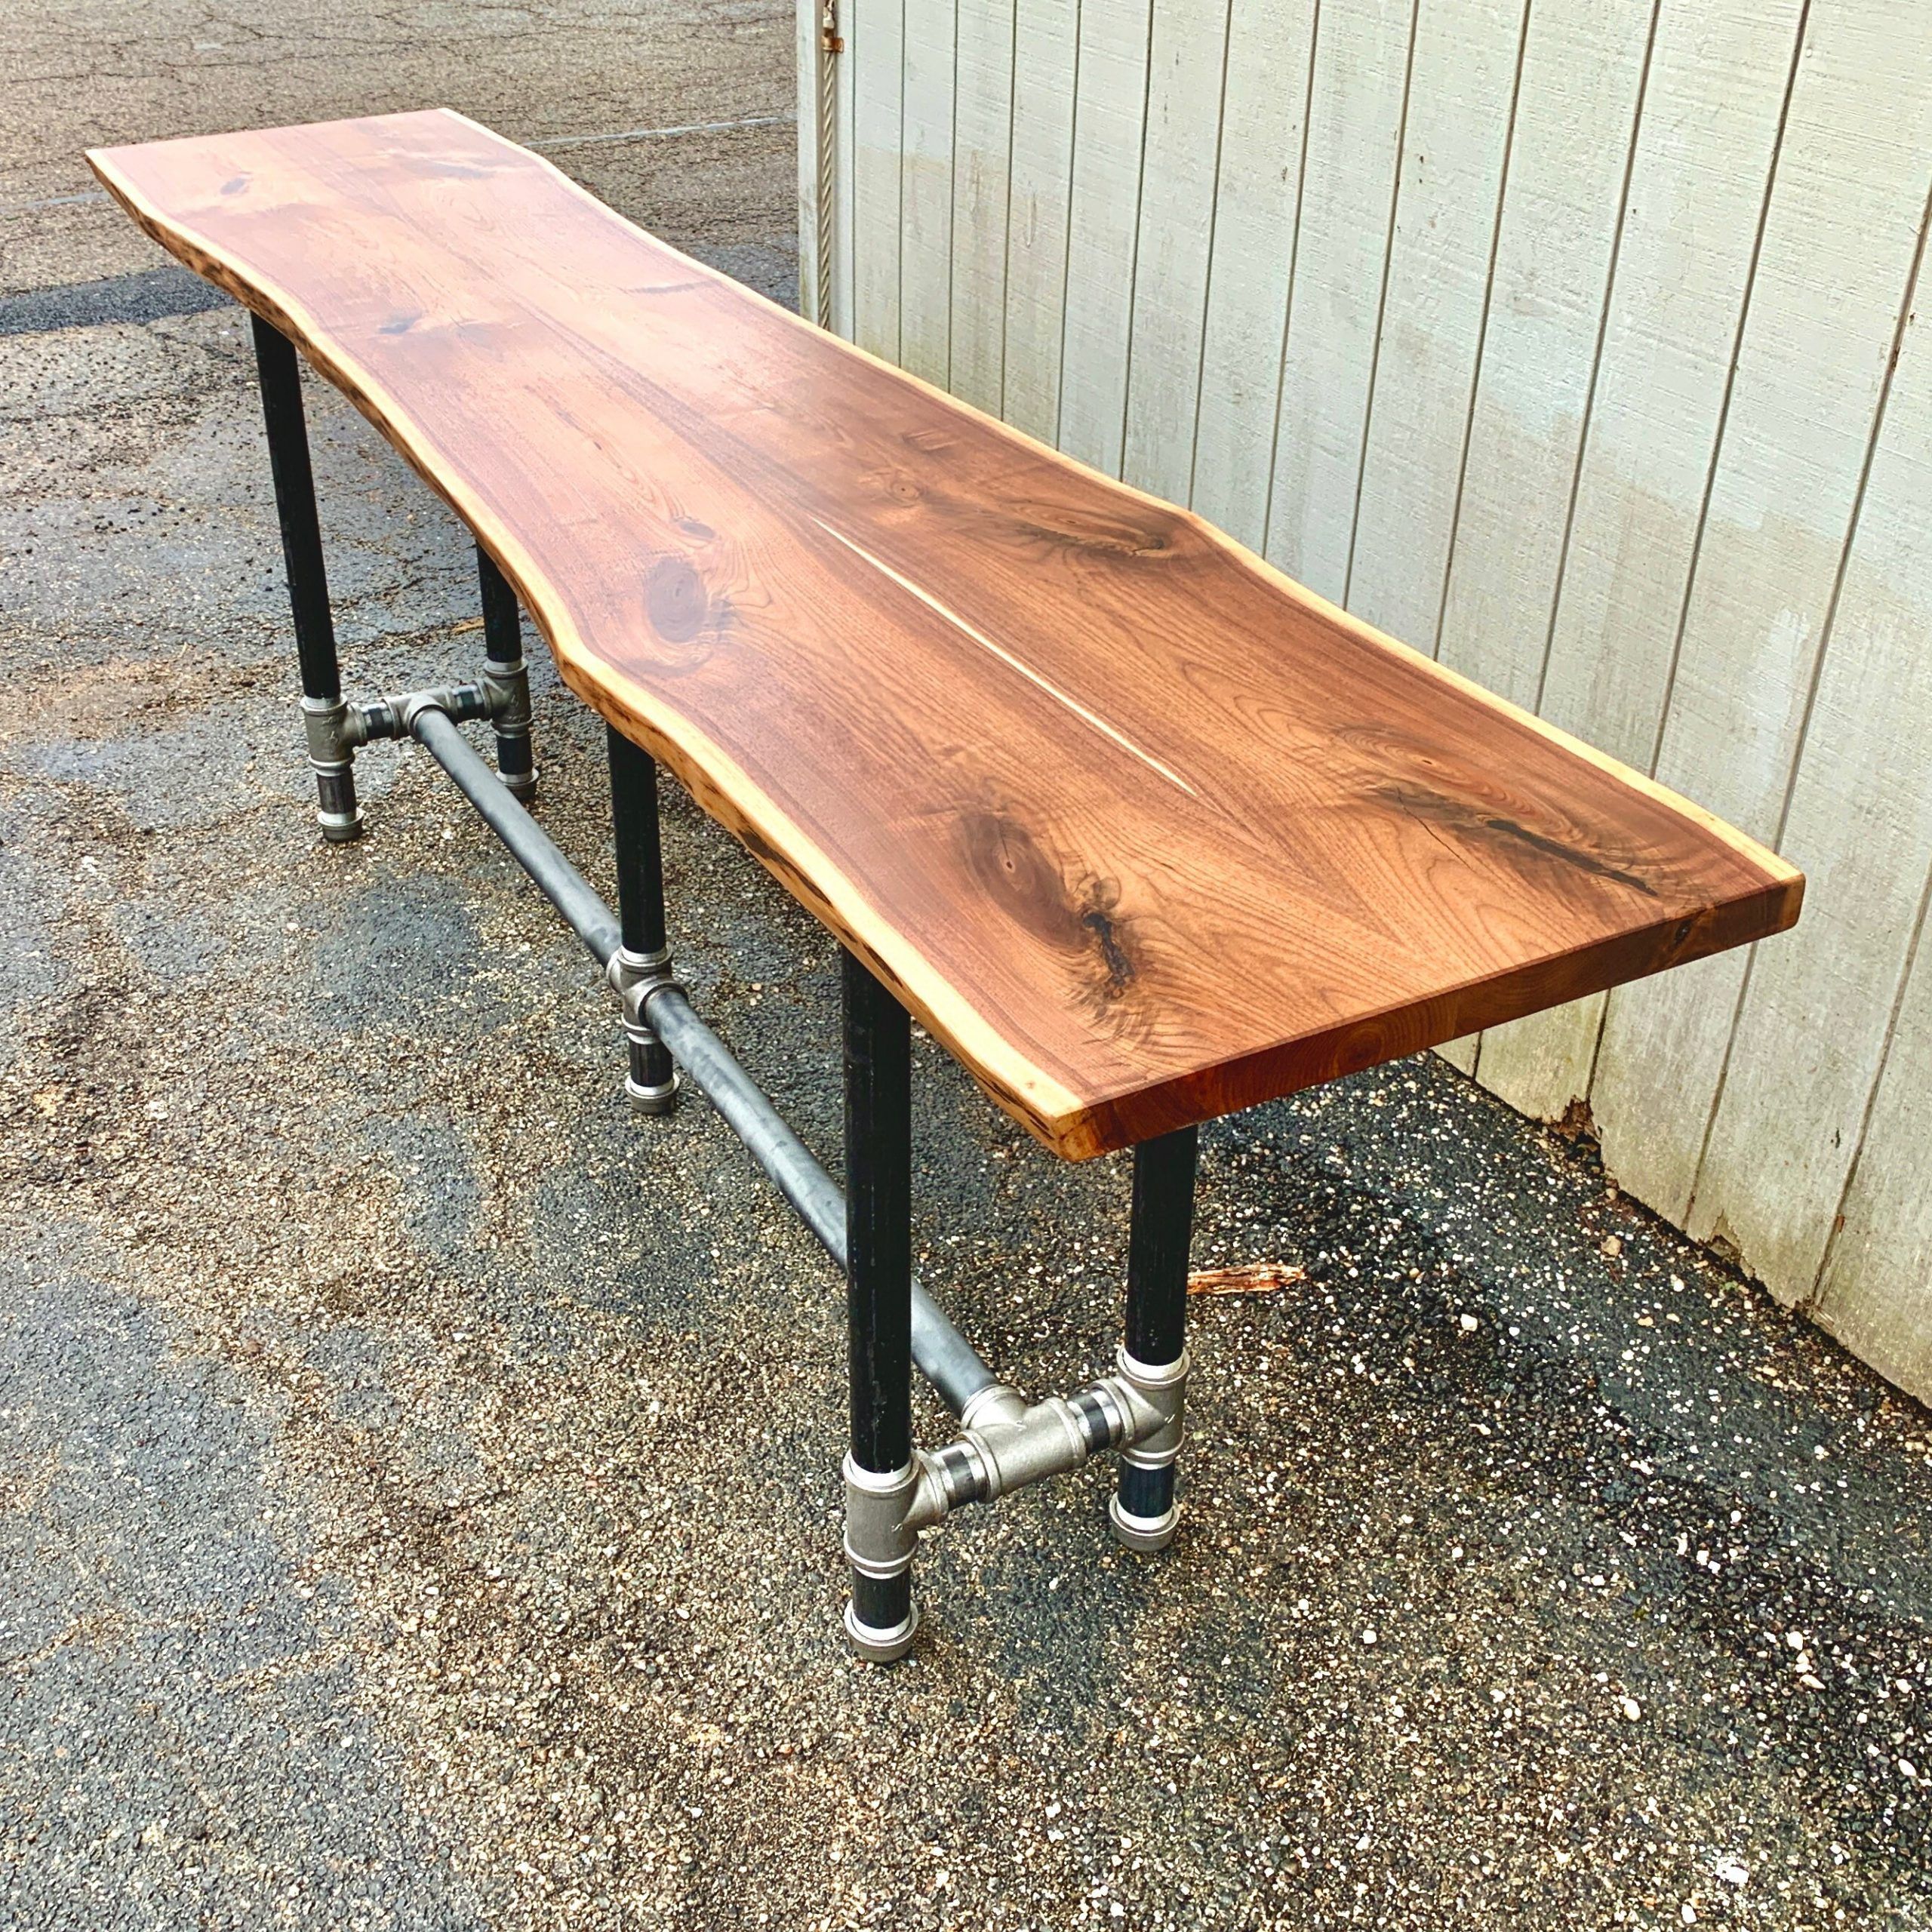 Preferred Warm Walnut Outdoor Tables Intended For Outdoor Walnut Table – Etsy (View 11 of 15)